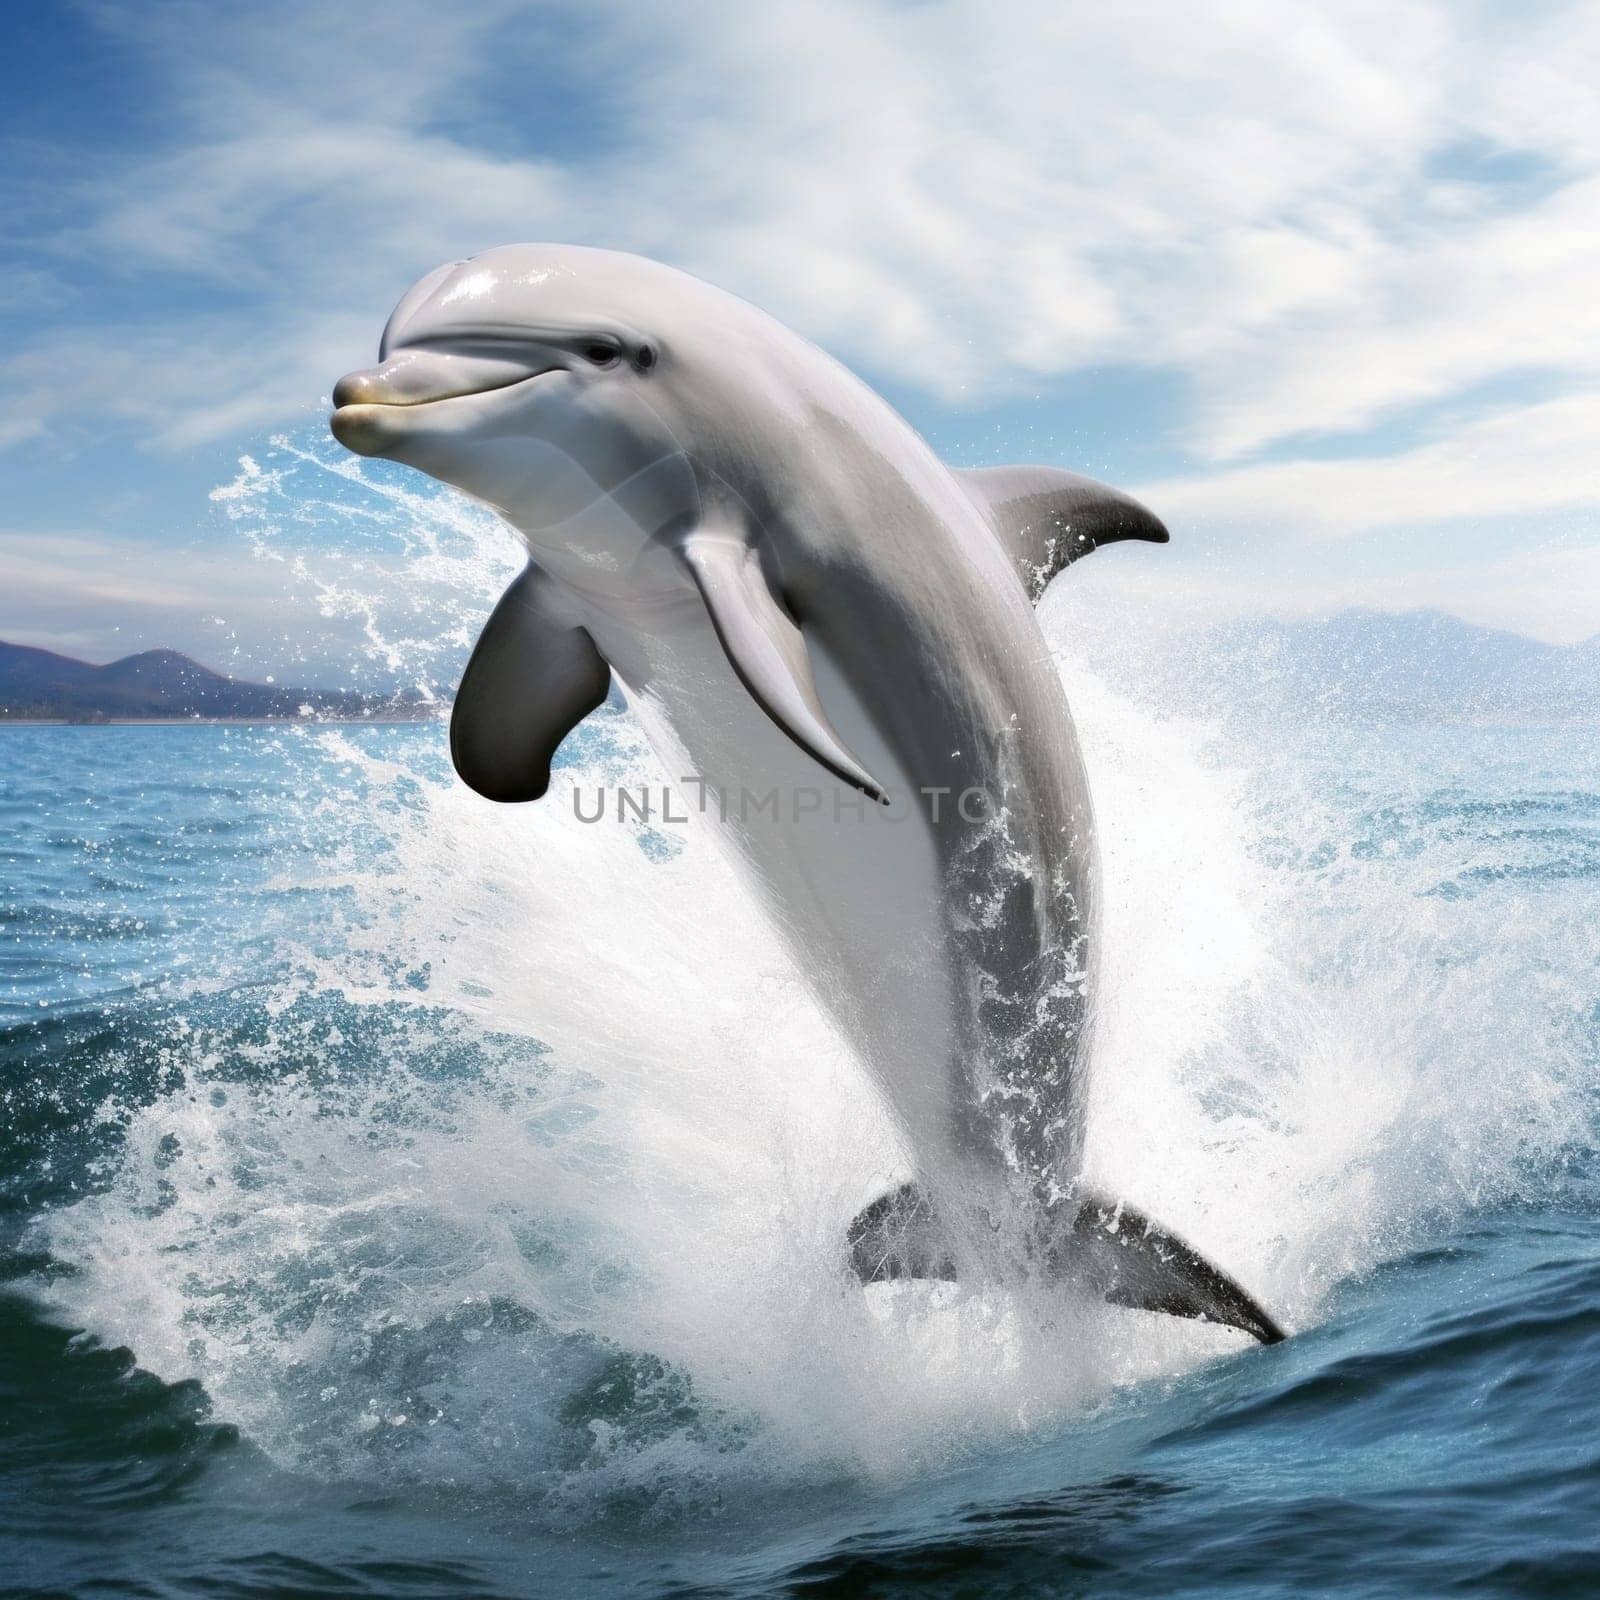 A dolphin jumping out of the water in a body of water